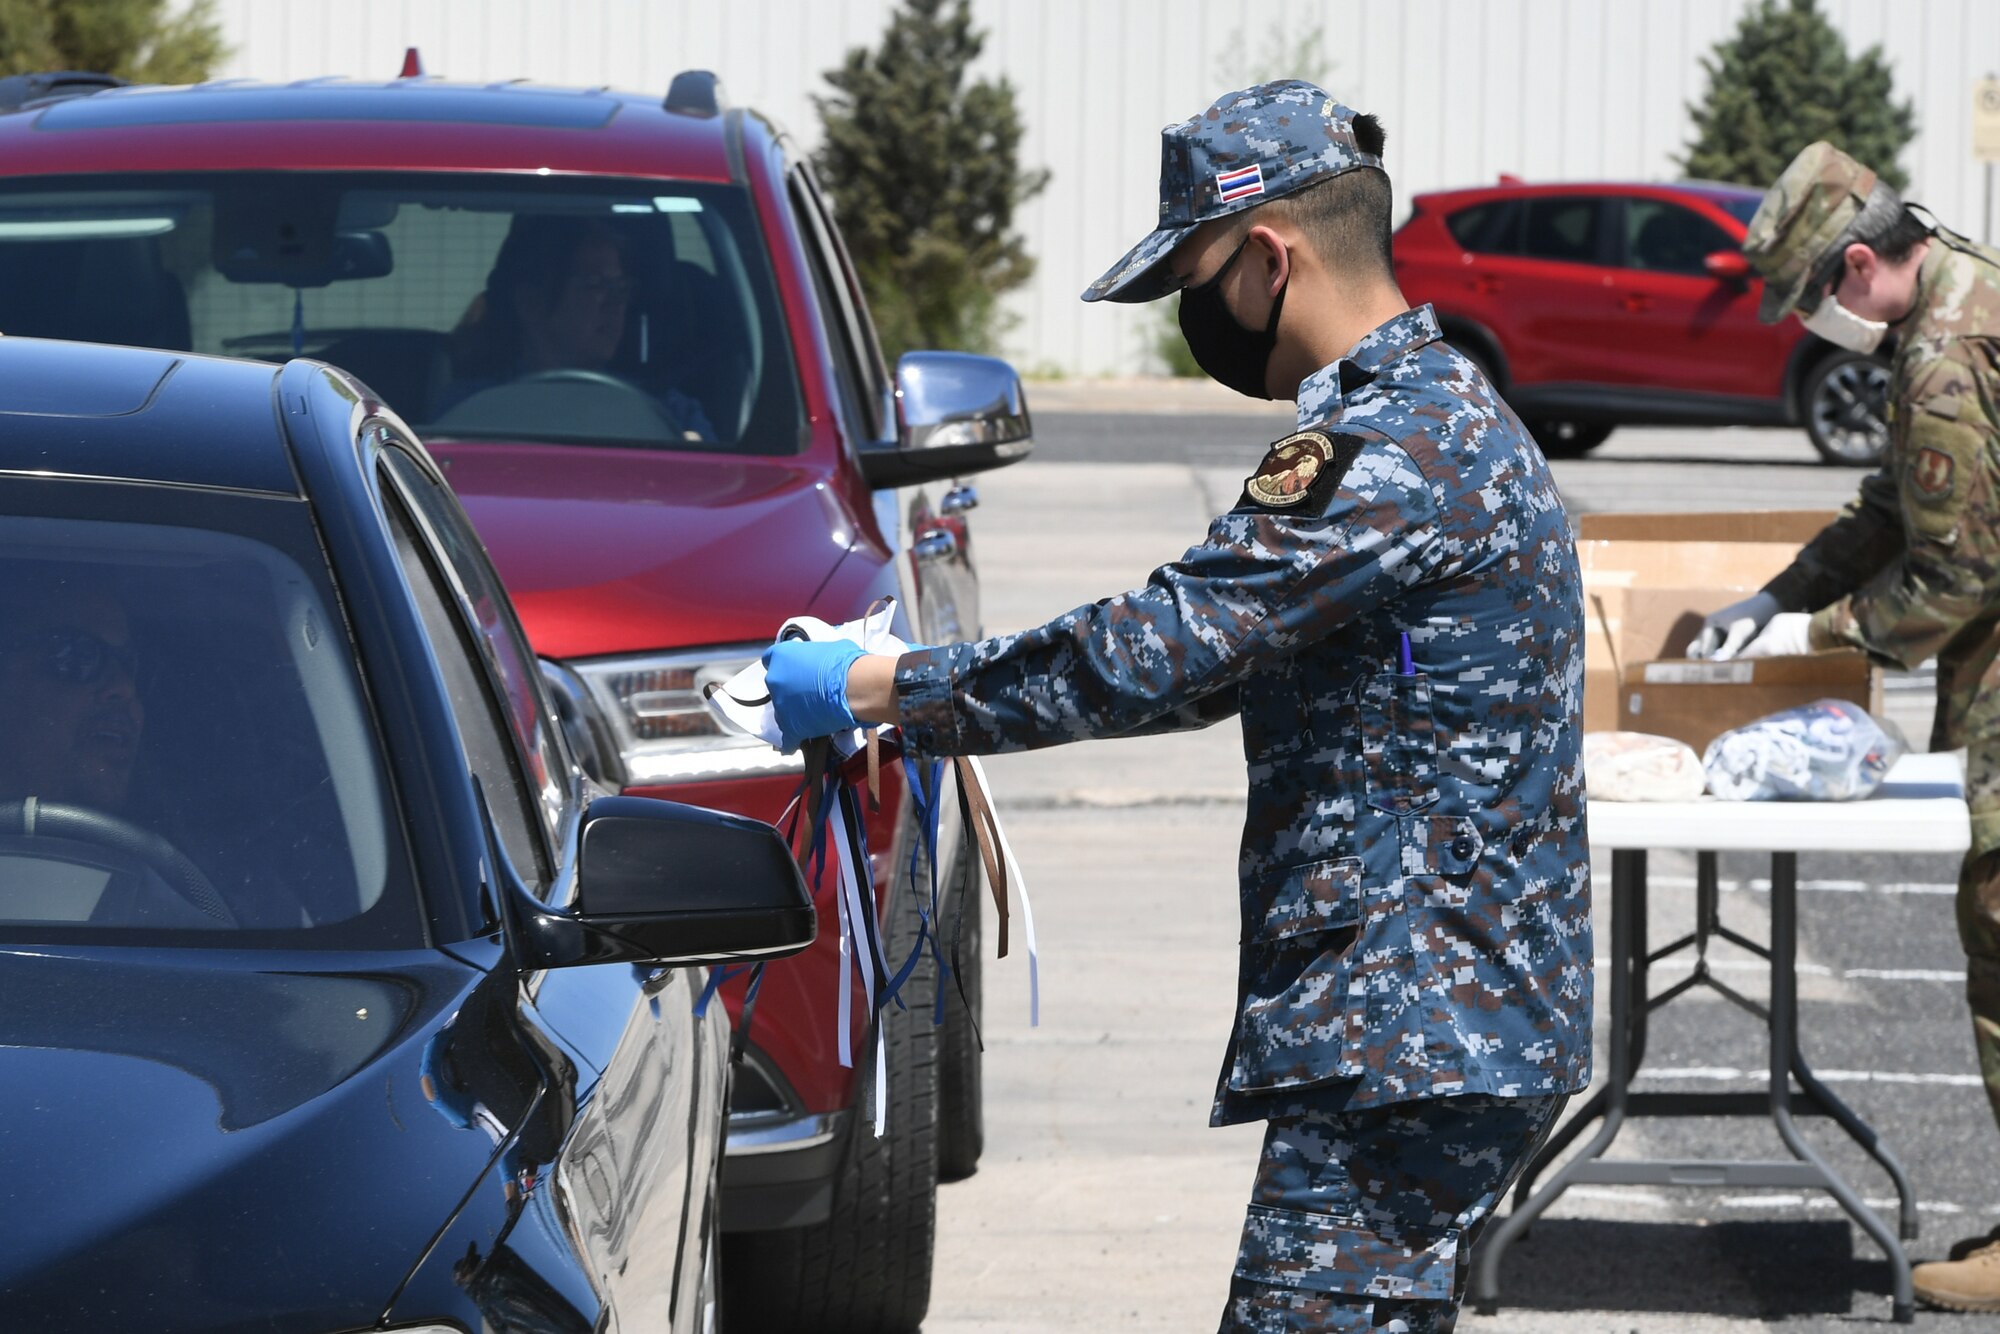 Capt. Krit Bualert, a Royal Thai Air Force officer assigned to 75th Logistics Readiness Squadron, hands out cloth masks to military and civilian Airmen April 28, 2020, at Hill Air Force Base, Utah. Around 4,000 masks, most donated from nearby communities and also from the 531st Armament Textile Shop, were given out to Team Hill to keep safe and healthy during the COVID-19 pandemic. (U.S. Air Force photo by Cynthia Griggs)